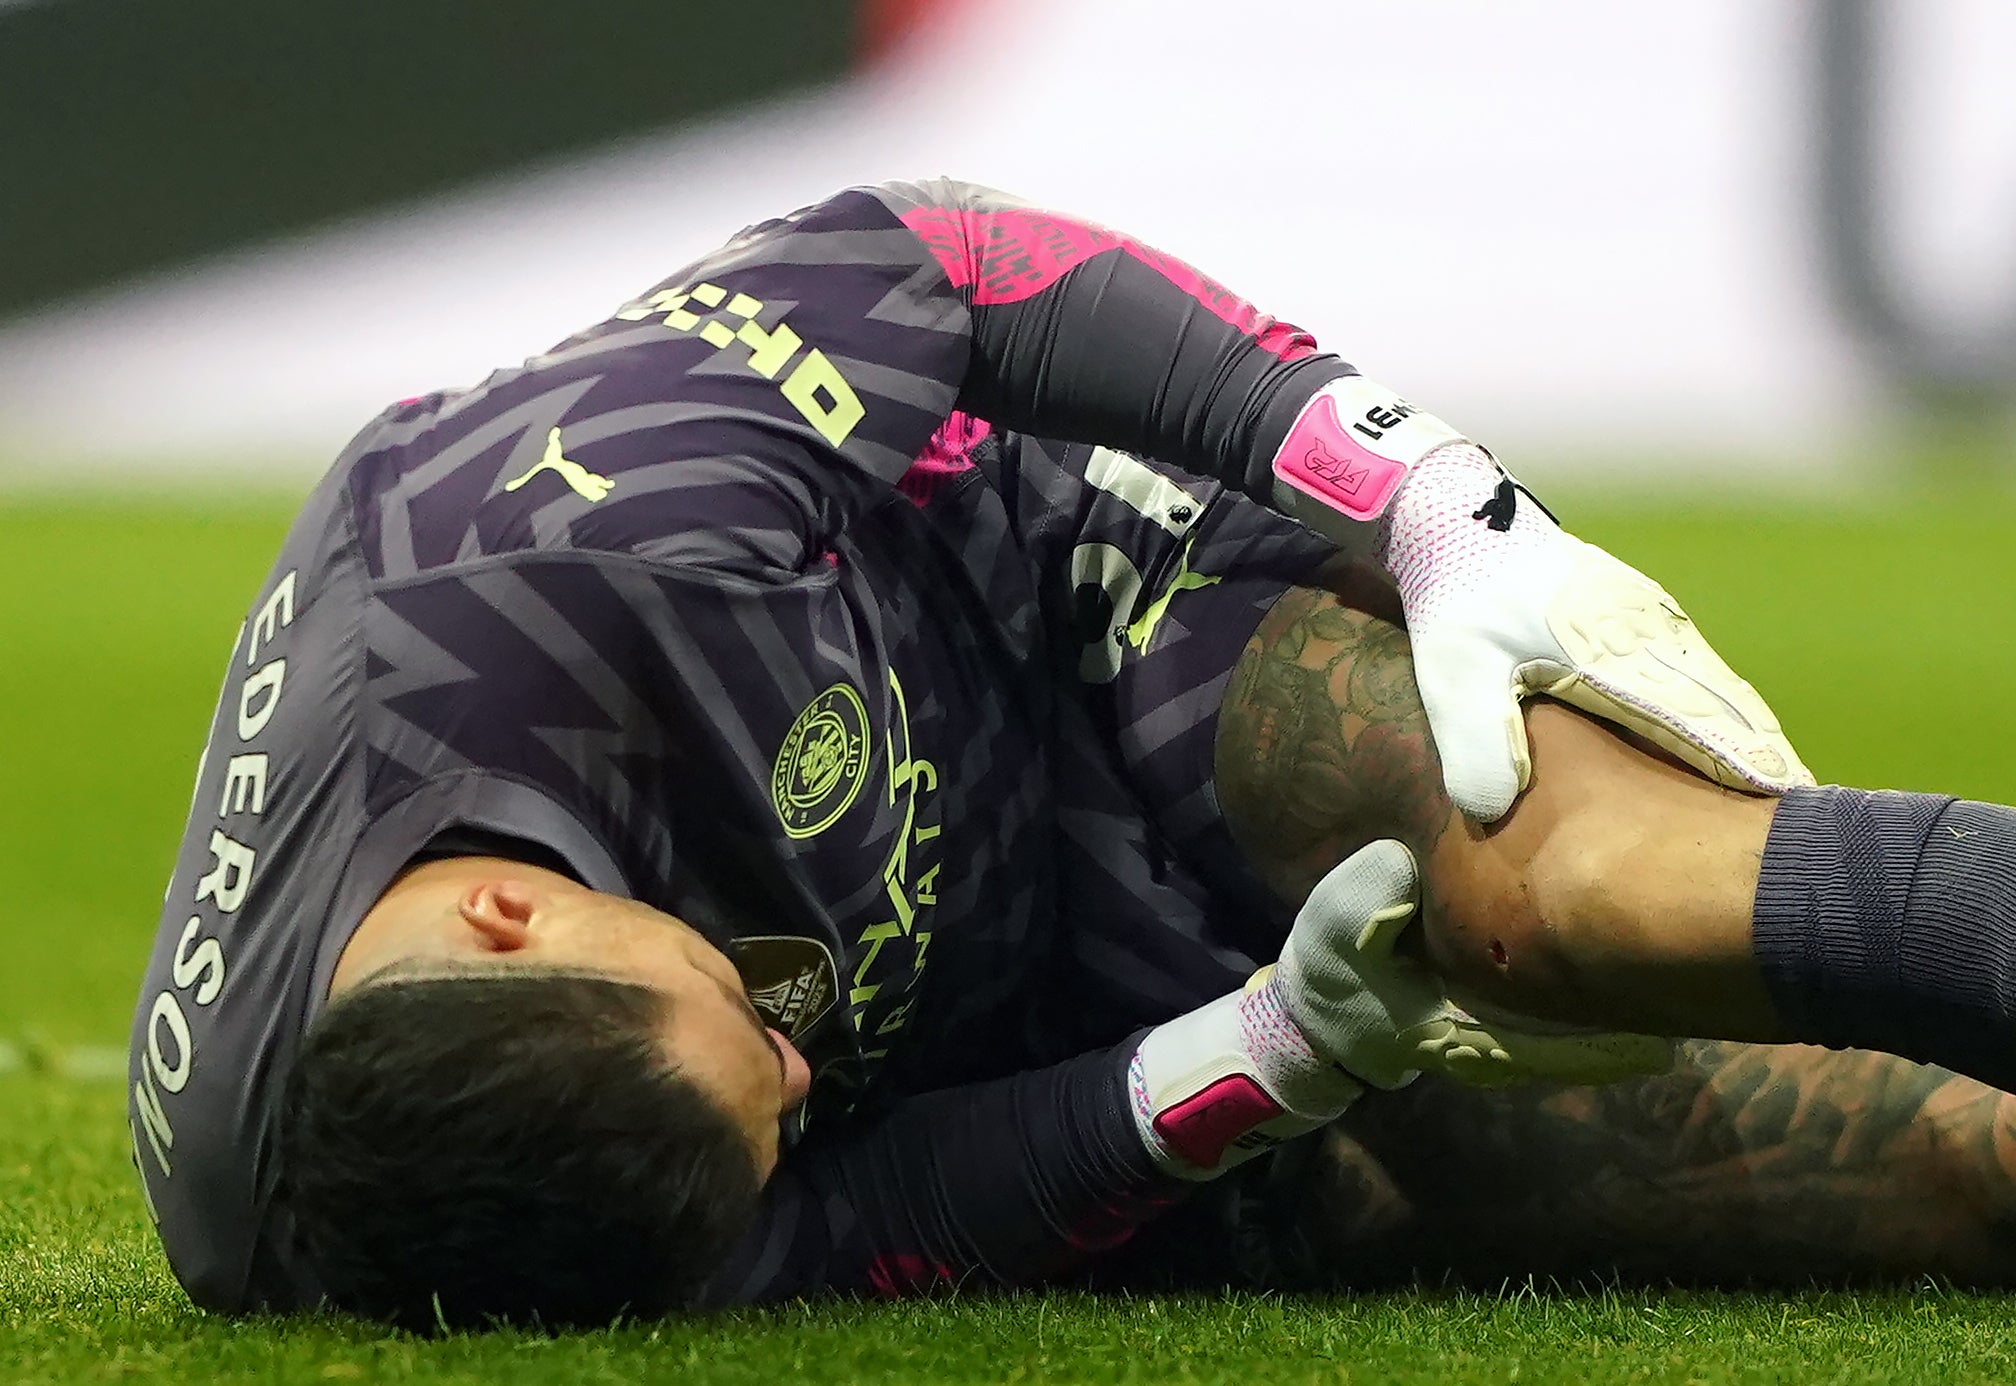 Ederson appeared to be in serious discomfort as he left the field